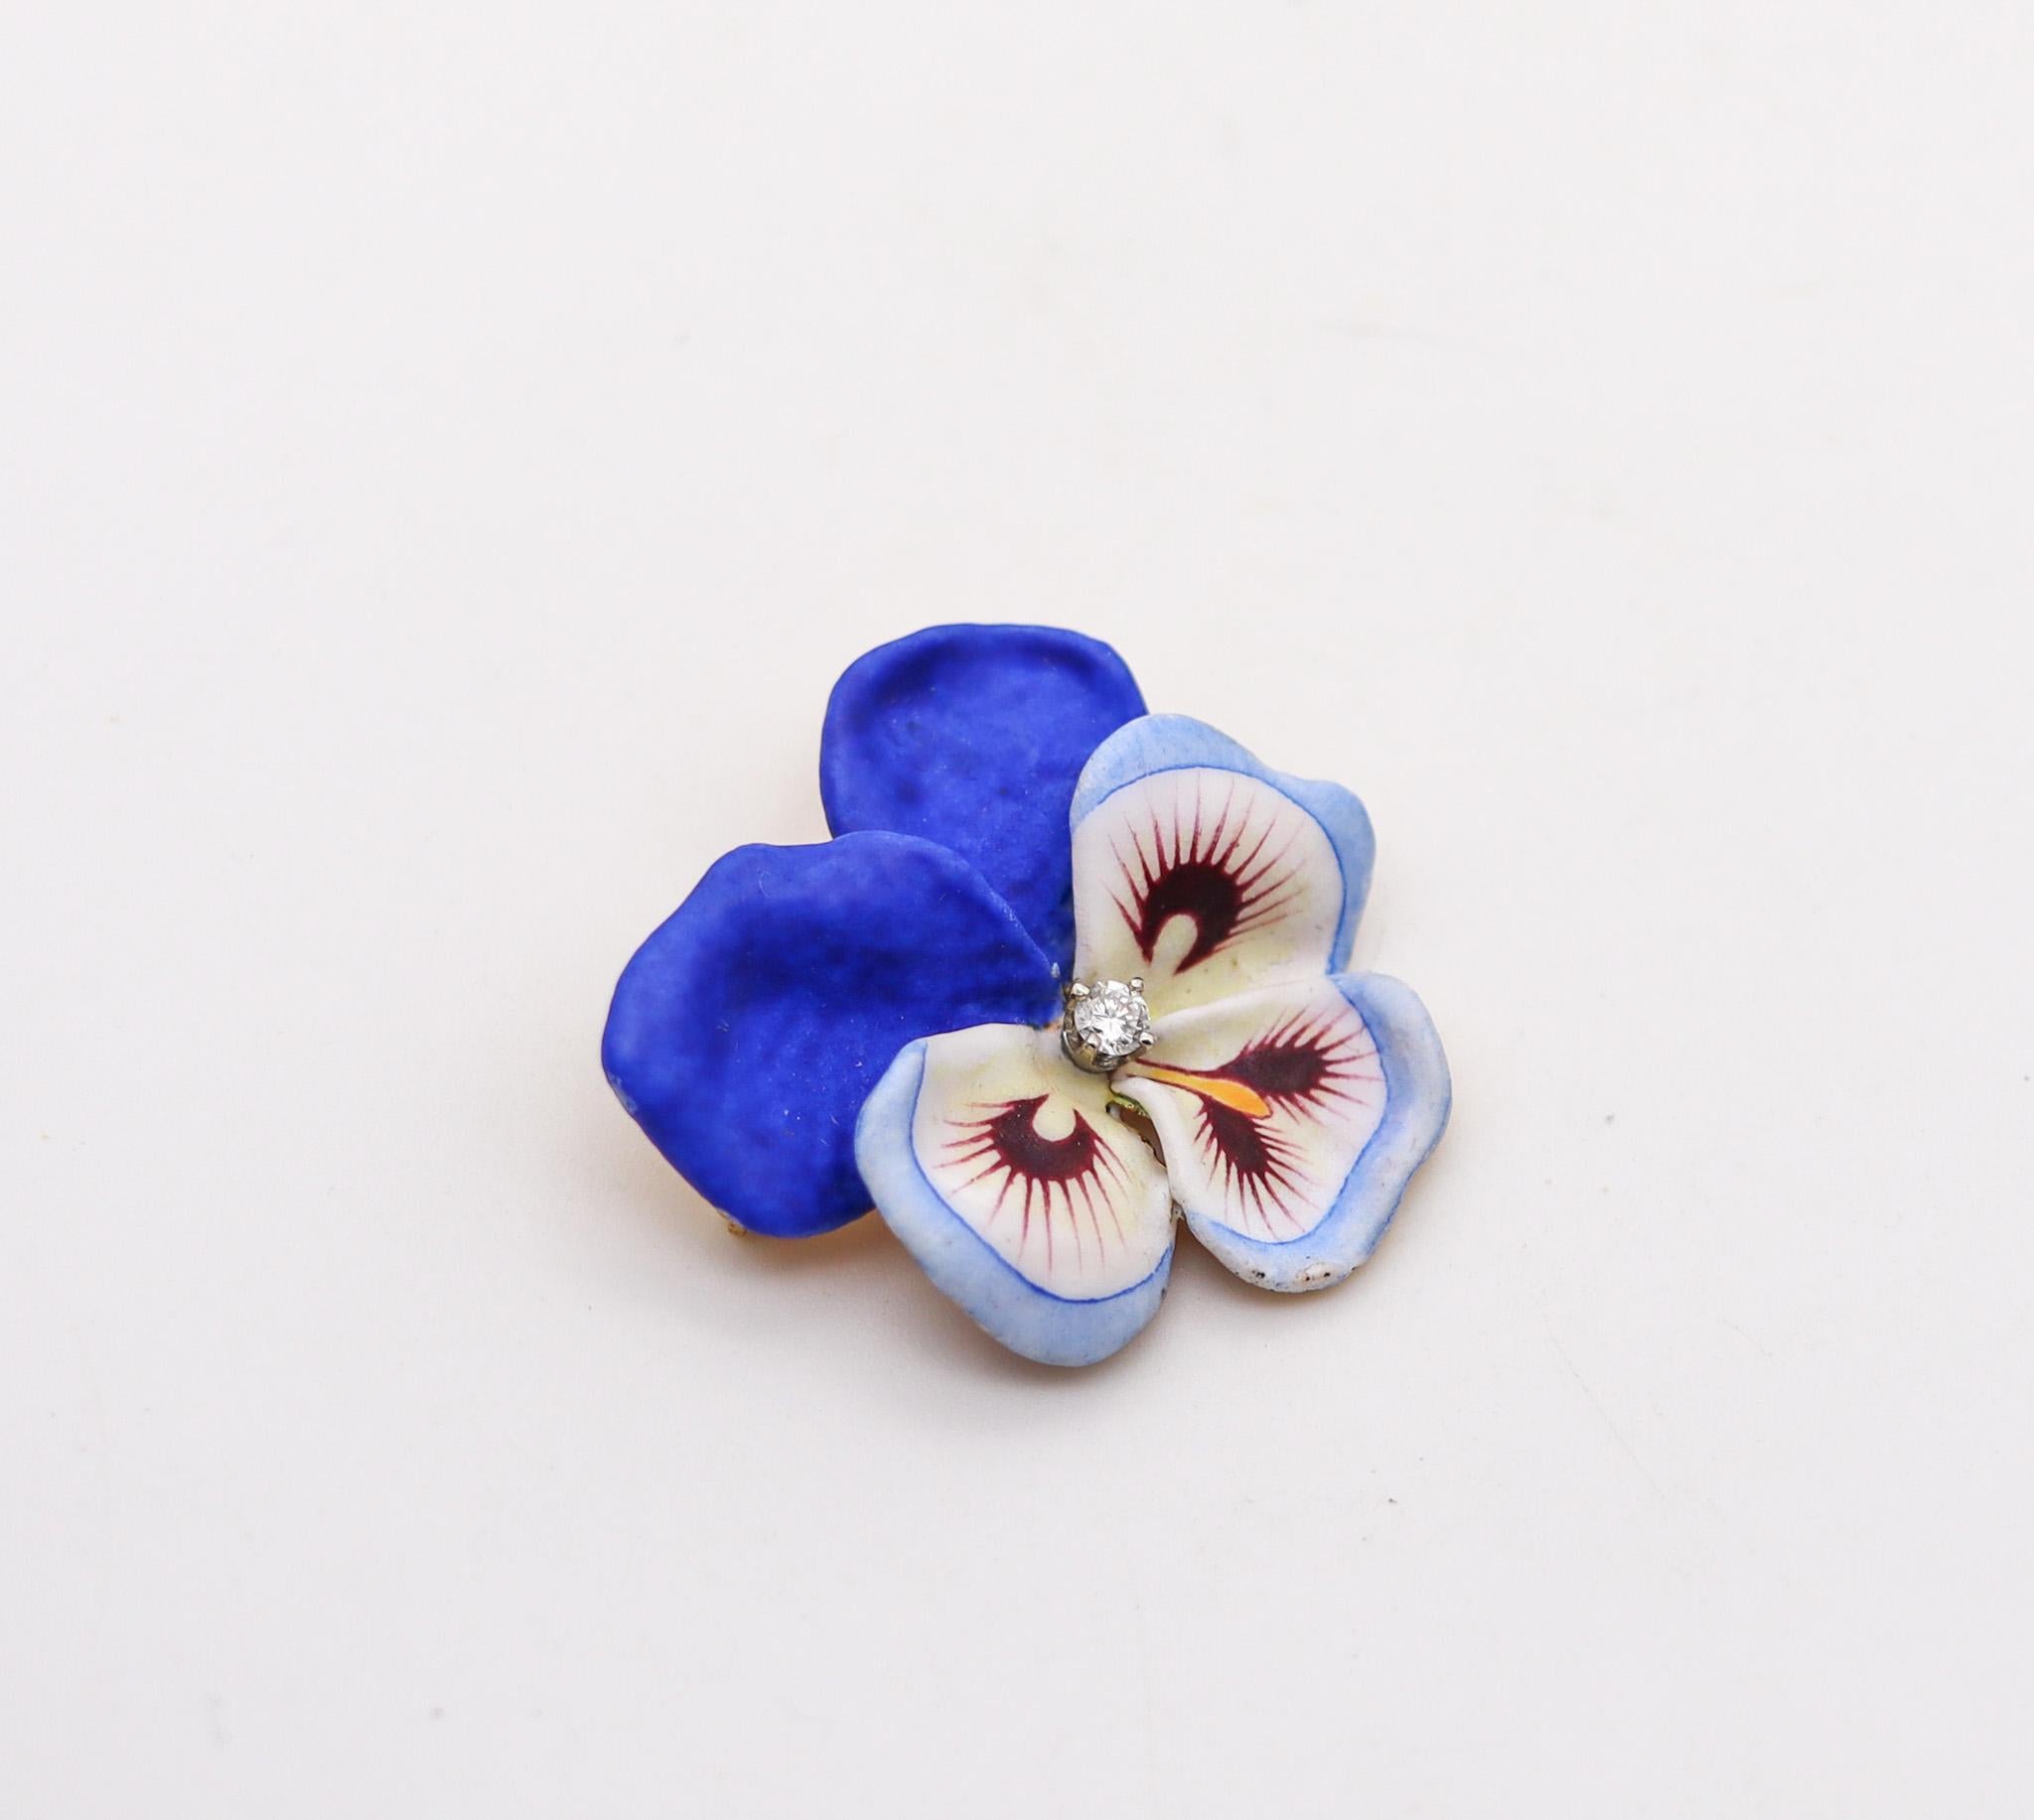 Enameled Pansy flower brooch designed by Larter & Son.

An exceptional and pristine Edwardian art Nouveau flower brooch, created in Newark New Jersey by the jewelry company of Larter & Sons., back in the 1900. This beautiful brooch has been